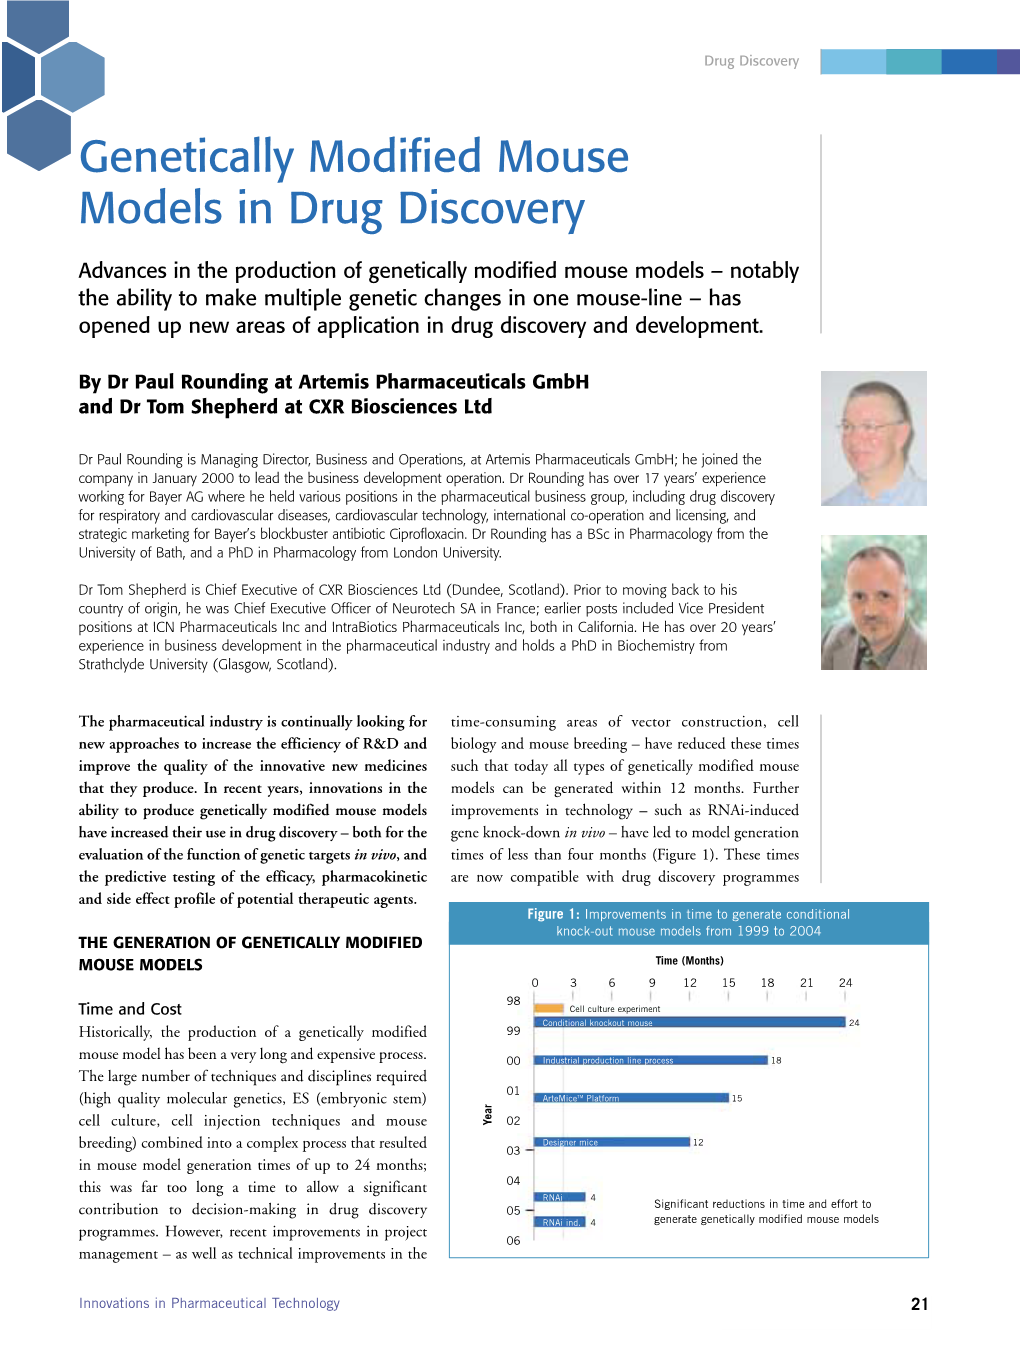 Genetically Modified Mouse Models in Drug Discovery